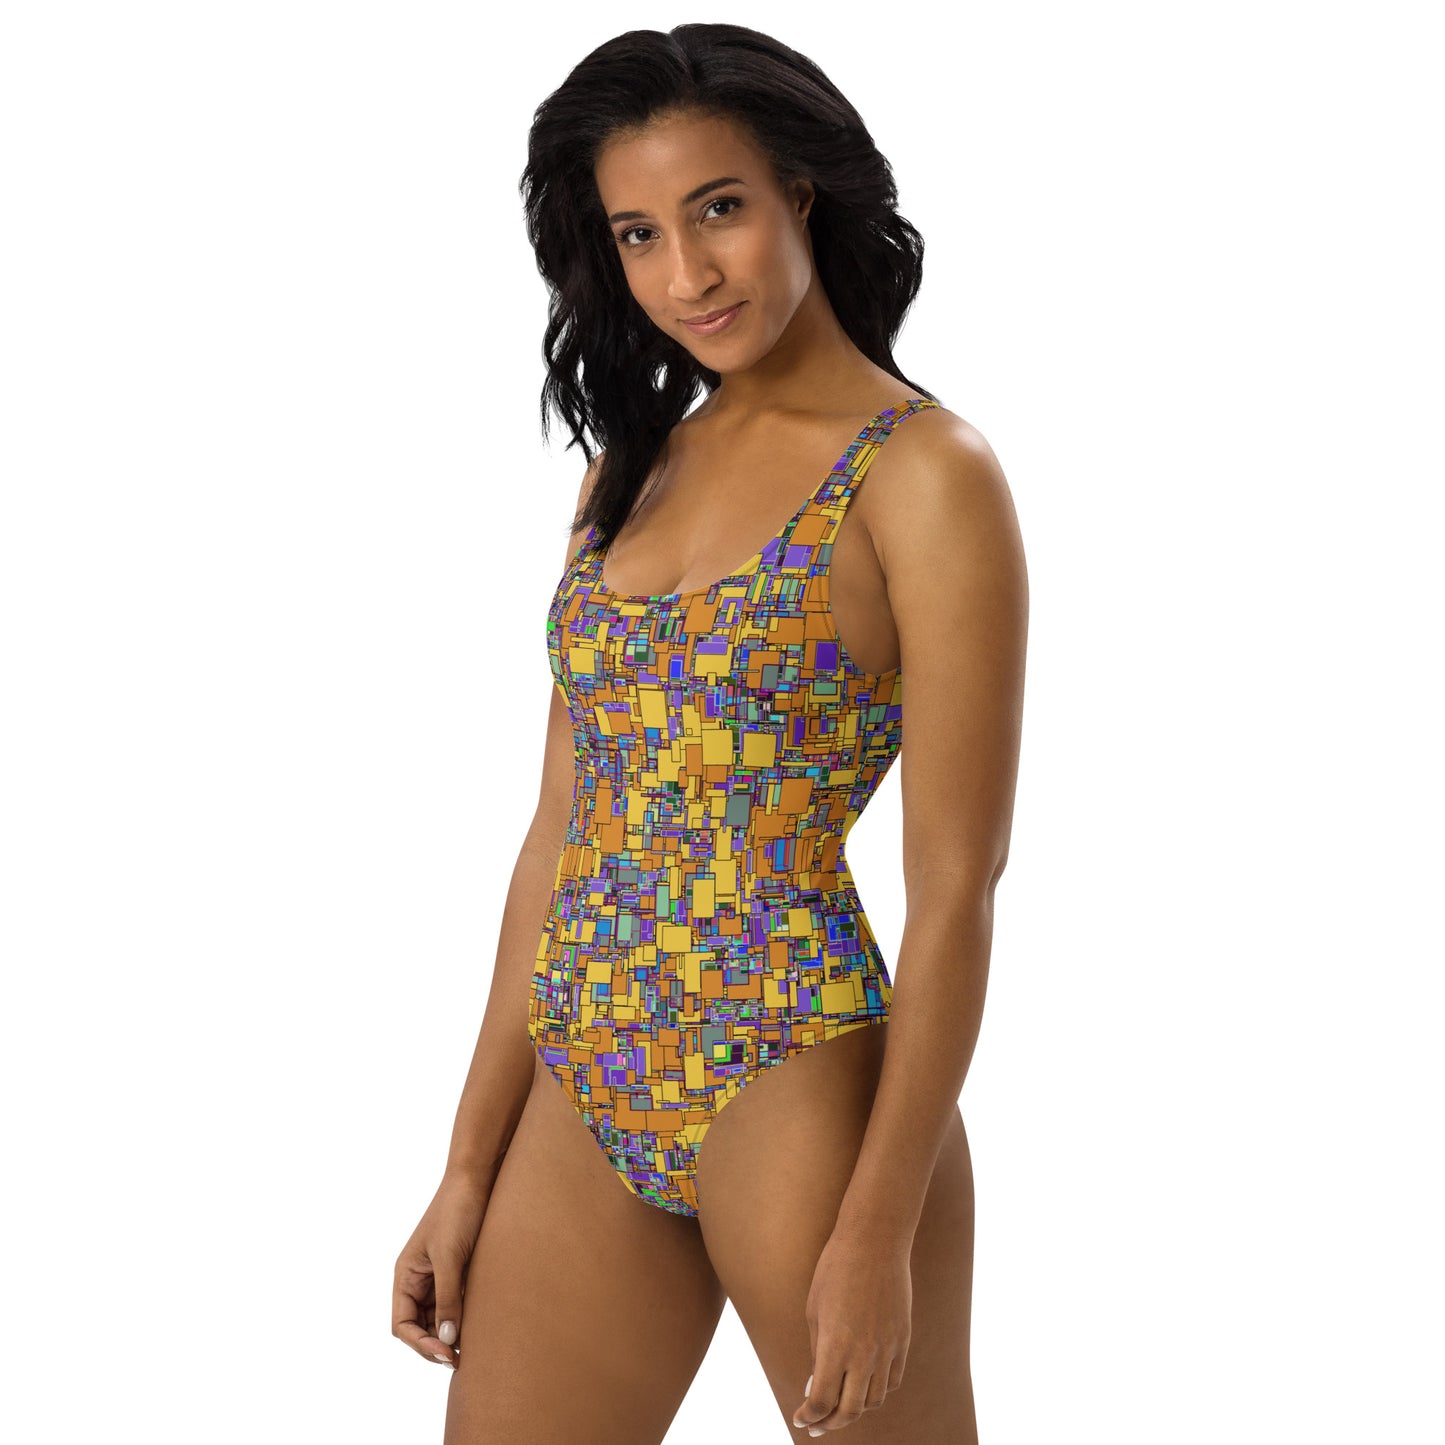 Make a Statement with Our Whimsical and Colorful Swimsuit - Stand Out in Style!